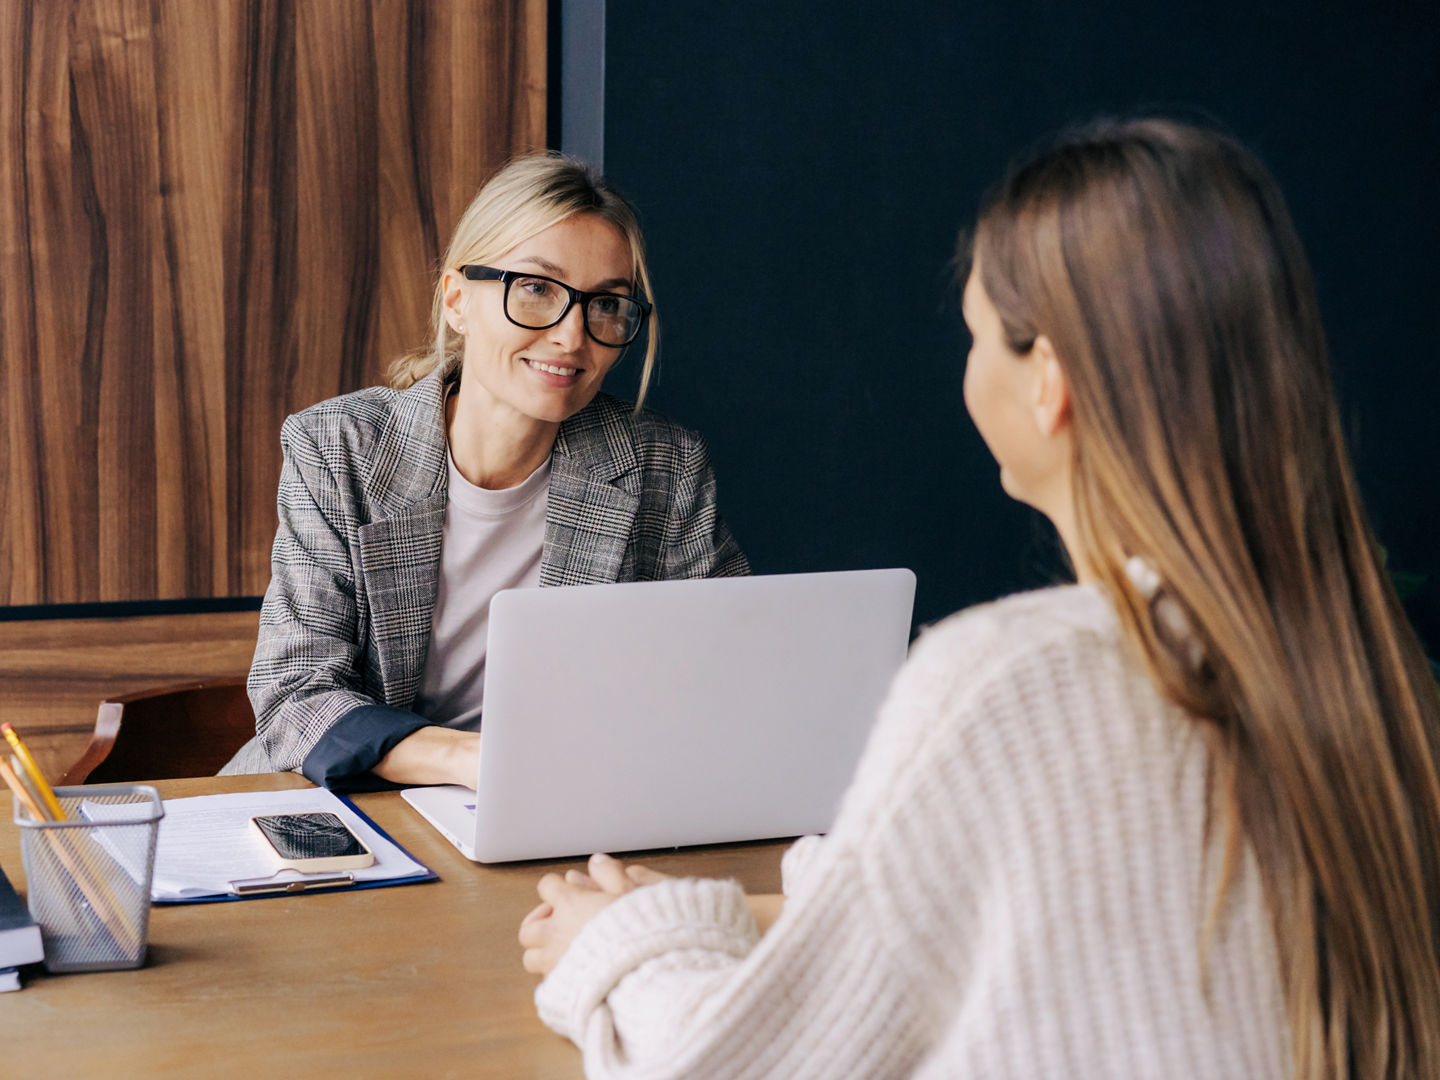 A female professional sitting at a desk in an office is interviewing a candidate for a position.